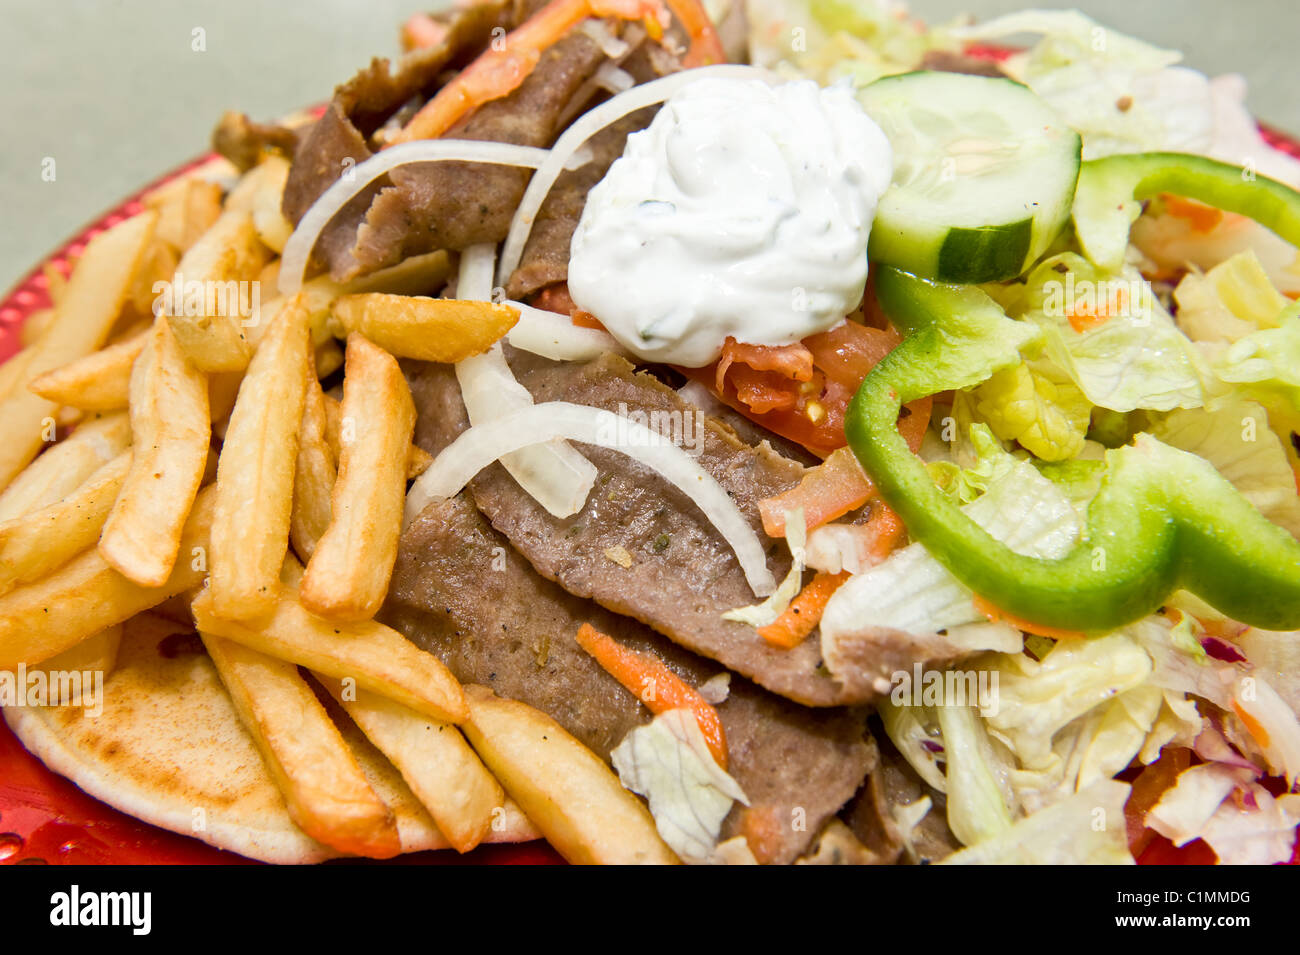 Large serving of Greek gyro sandwich served with French fries, vegetables, and condiments Stock Photo